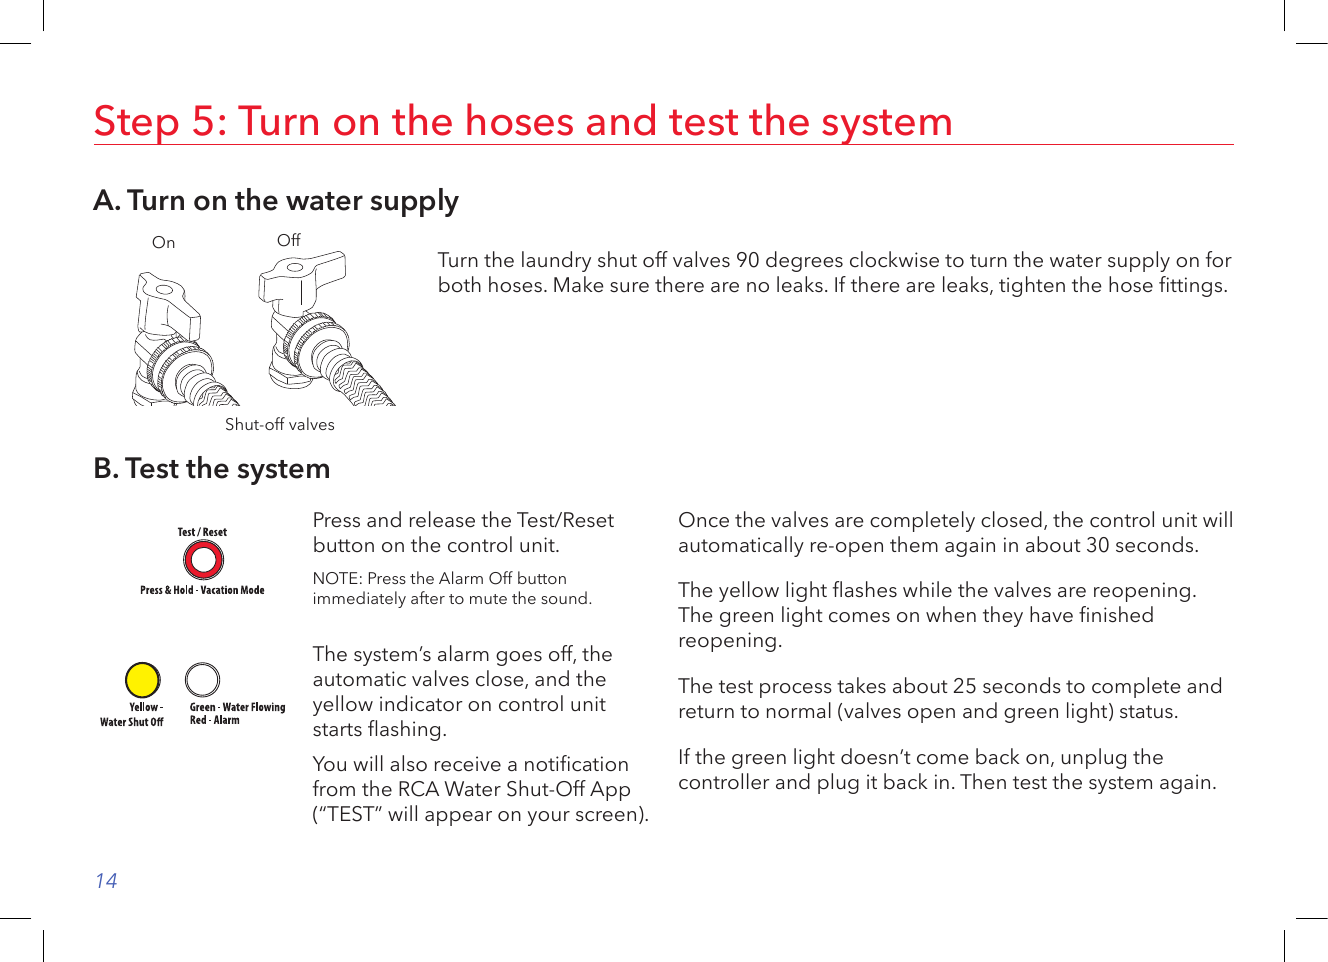 14Step 5: Turn on the hoses and test the systemA. Turn on the water supplyShut-off valvesOn Off Turn the laundry shut off valves 90 degrees clockwise to turn the water supply on for both hoses. Make sure there are no leaks. If there are leaks, tighten the hose ttings.B. Test the systemPress and release the Test/Reset button on the control unit. NOTE: Press the Alarm Off button immediately after to mute the sound.The system’s alarm goes off, the automatic valves close, and the yellow indicator on control unit starts ashing.You will also receive a notication from the RCA Water Shut-Off App (“TEST” will appear on your screen).Once the valves are completely closed, the control unit will automatically re-open them again in about 30 seconds. The yellow light ashes while the valves are reopening. The green light comes on when they have nished reopening. The test process takes about 25 seconds to complete and return to normal (valves open and green light) status. If the green light doesn’t come back on, unplug the controller and plug it back in. Then test the system again.